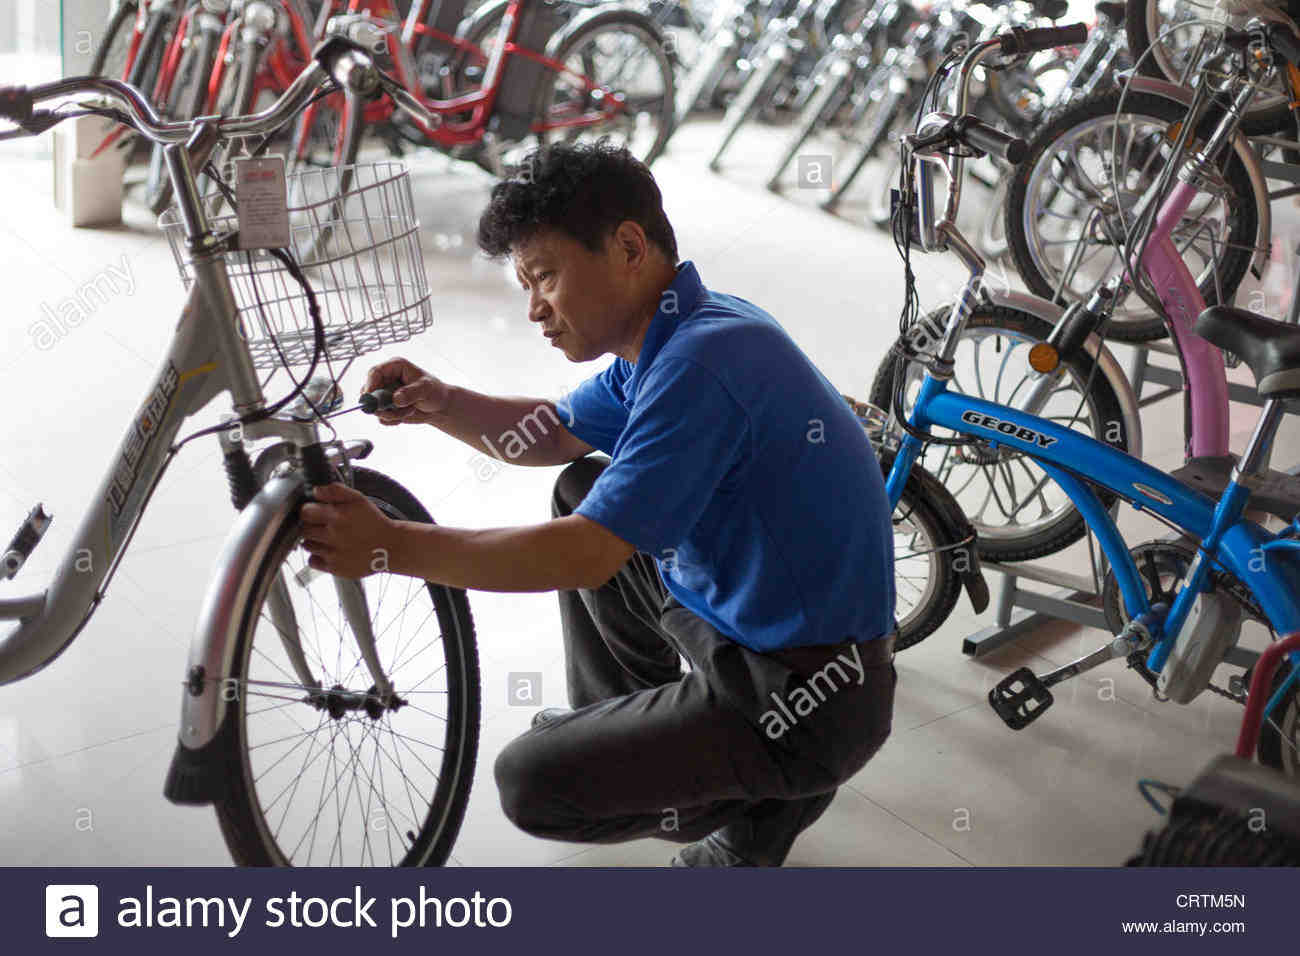 How much is an electric bike in China?